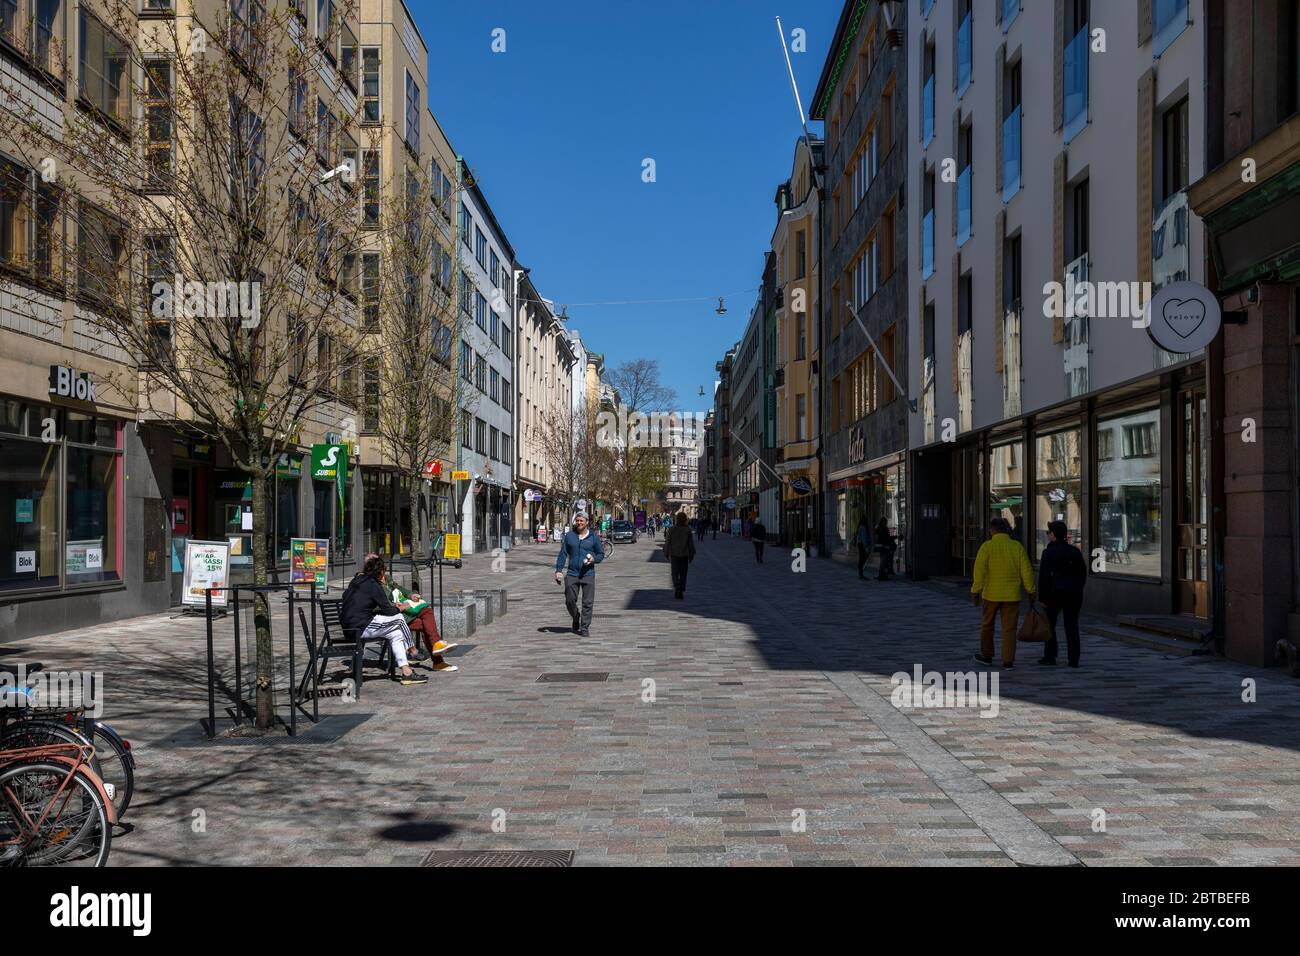 'Iso Roobertinkatu' is a famous walking street downtown Helsinki. Due to coronavirus pandemic, the amount of people on the streets has decreased . Stock Photo